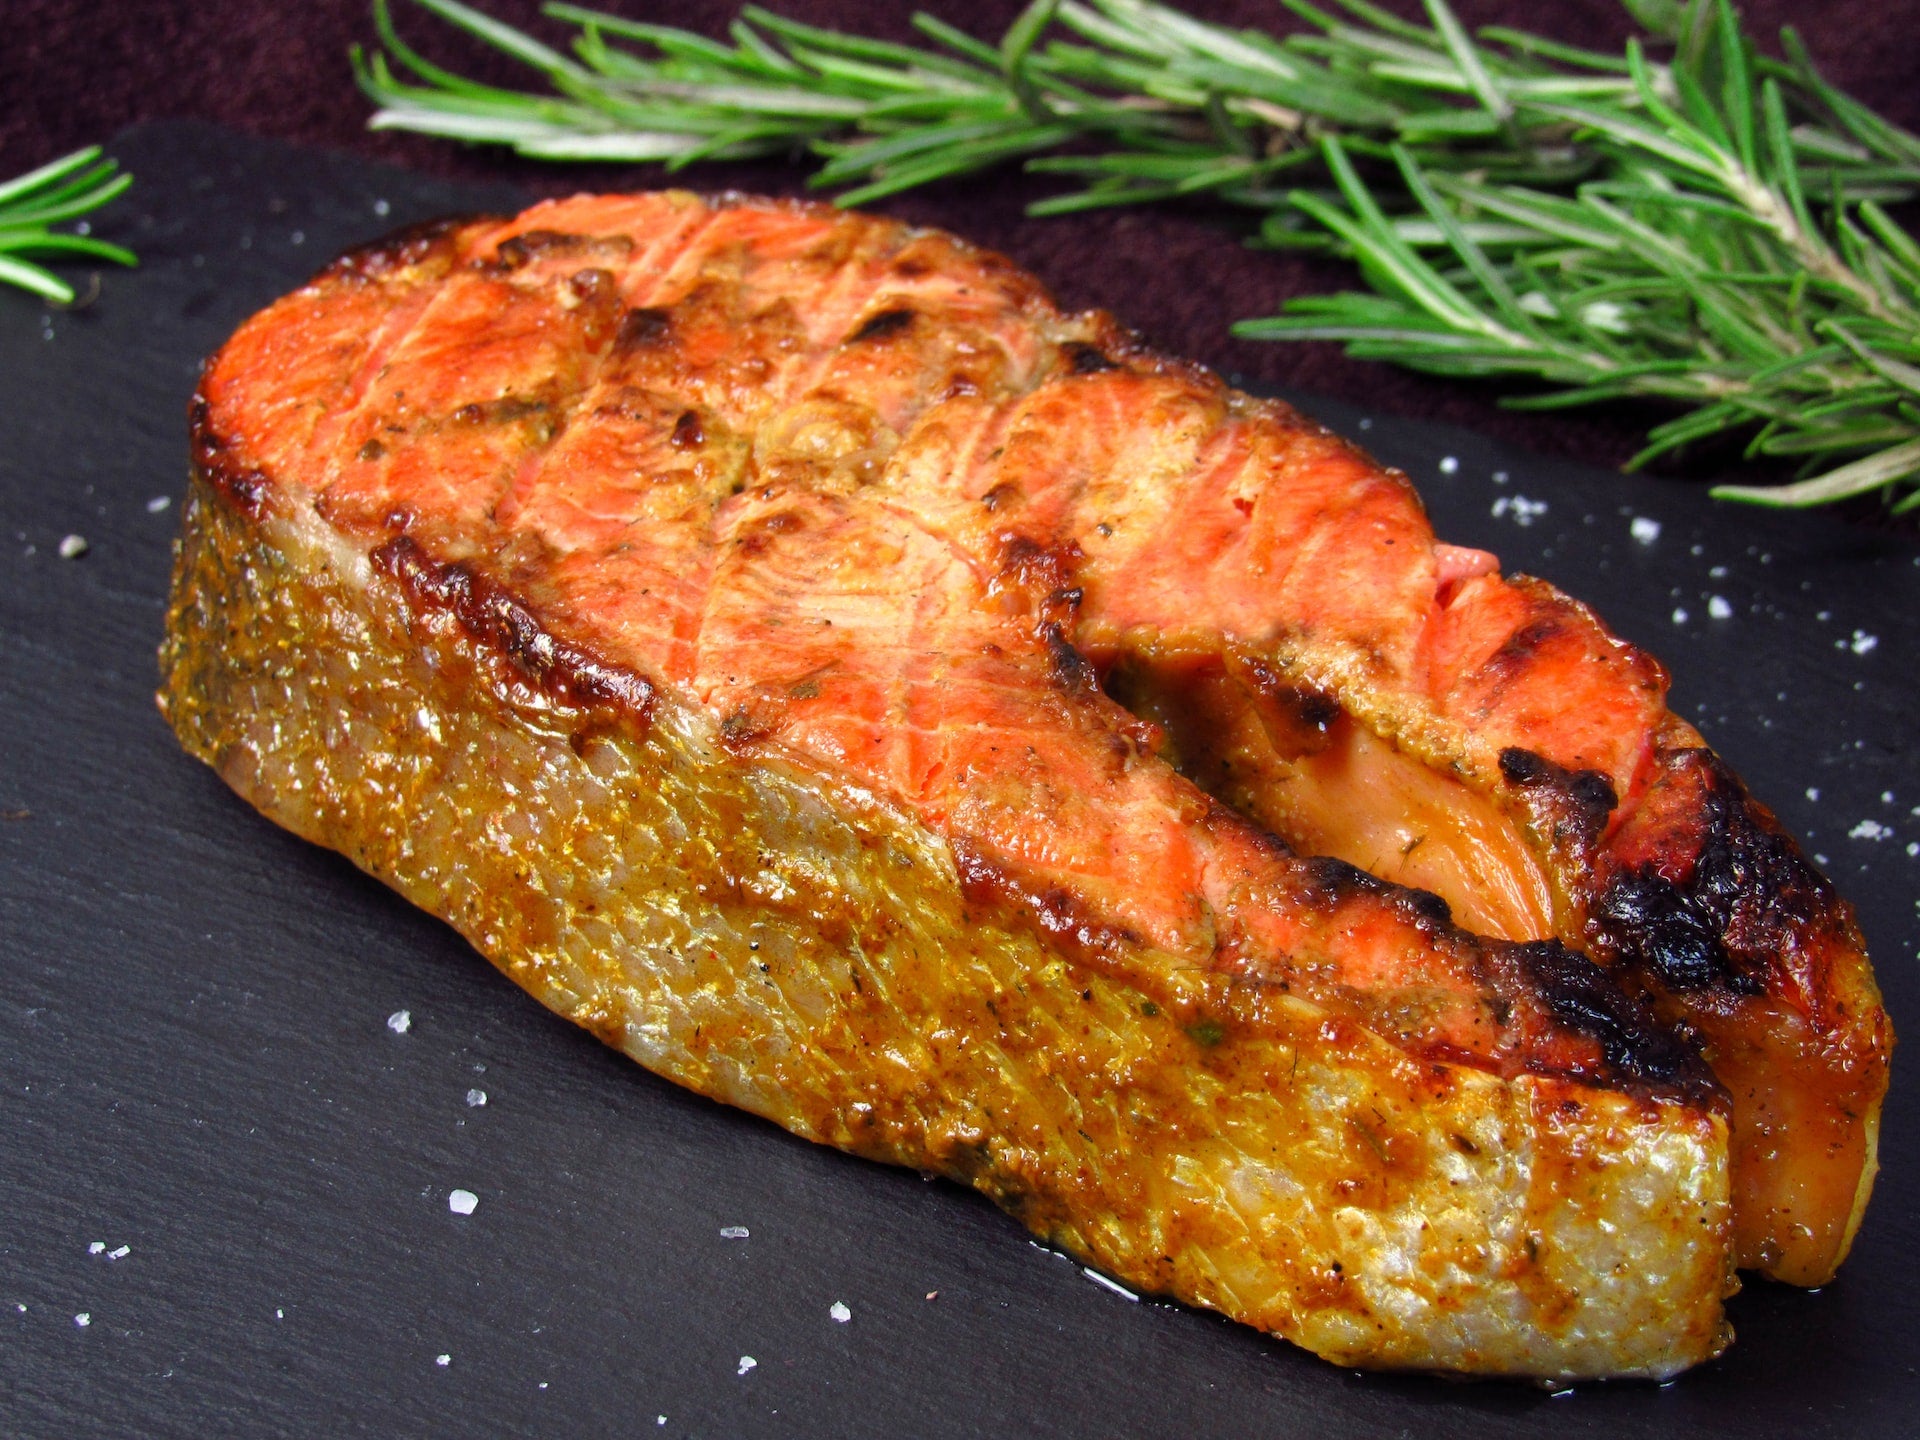 What are the best Spices for Salmon?